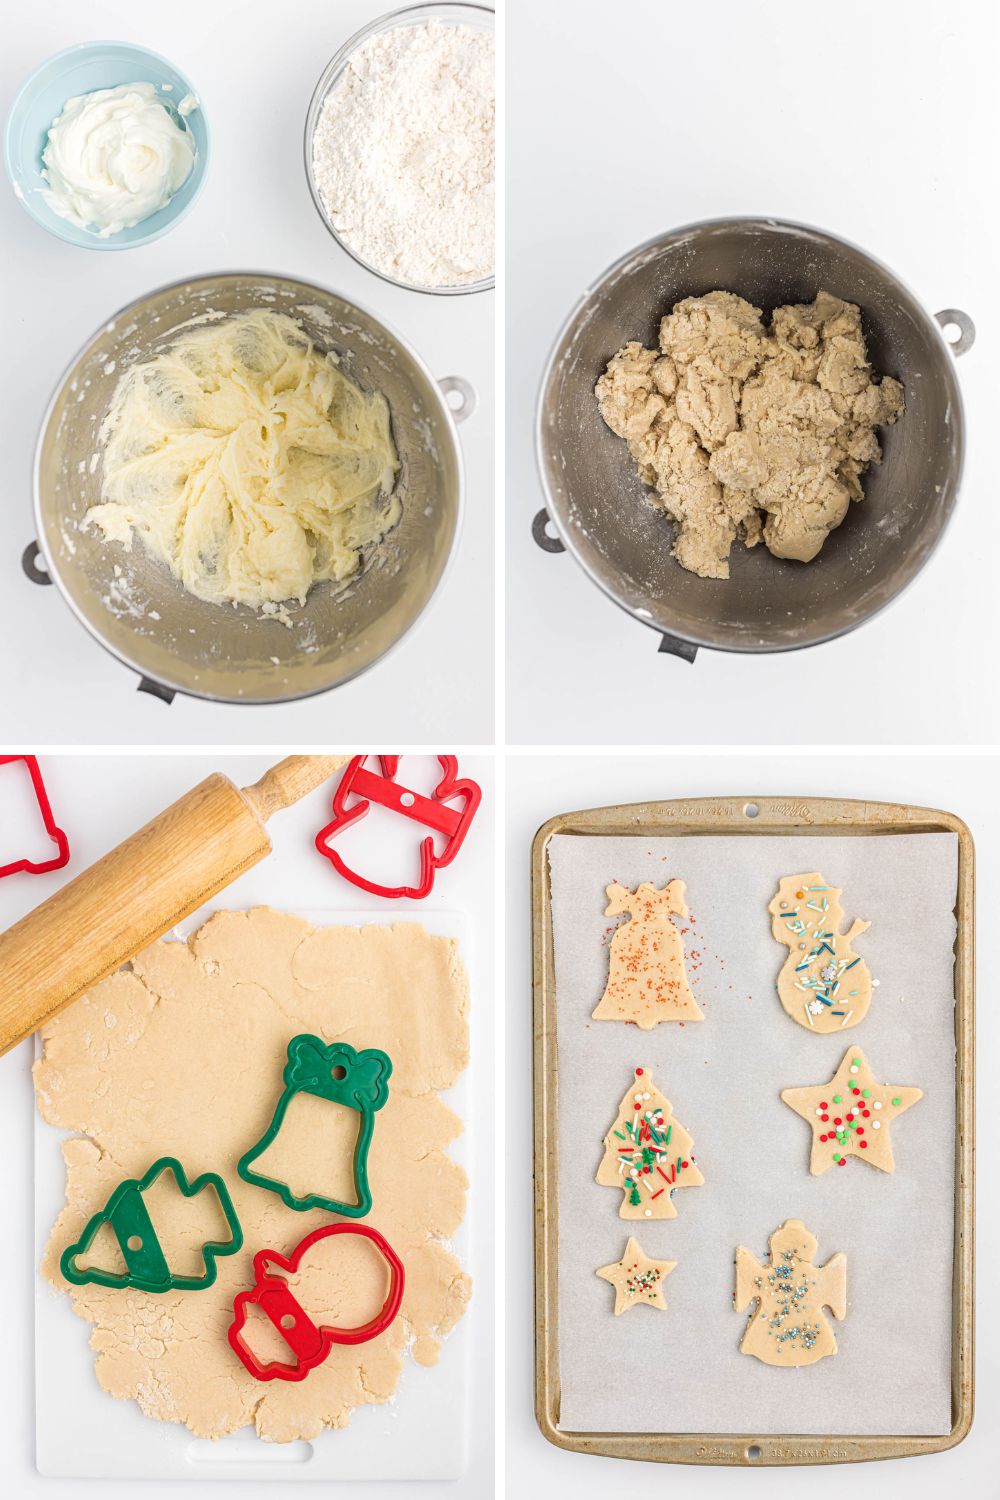 step by step photos of cream cookies.